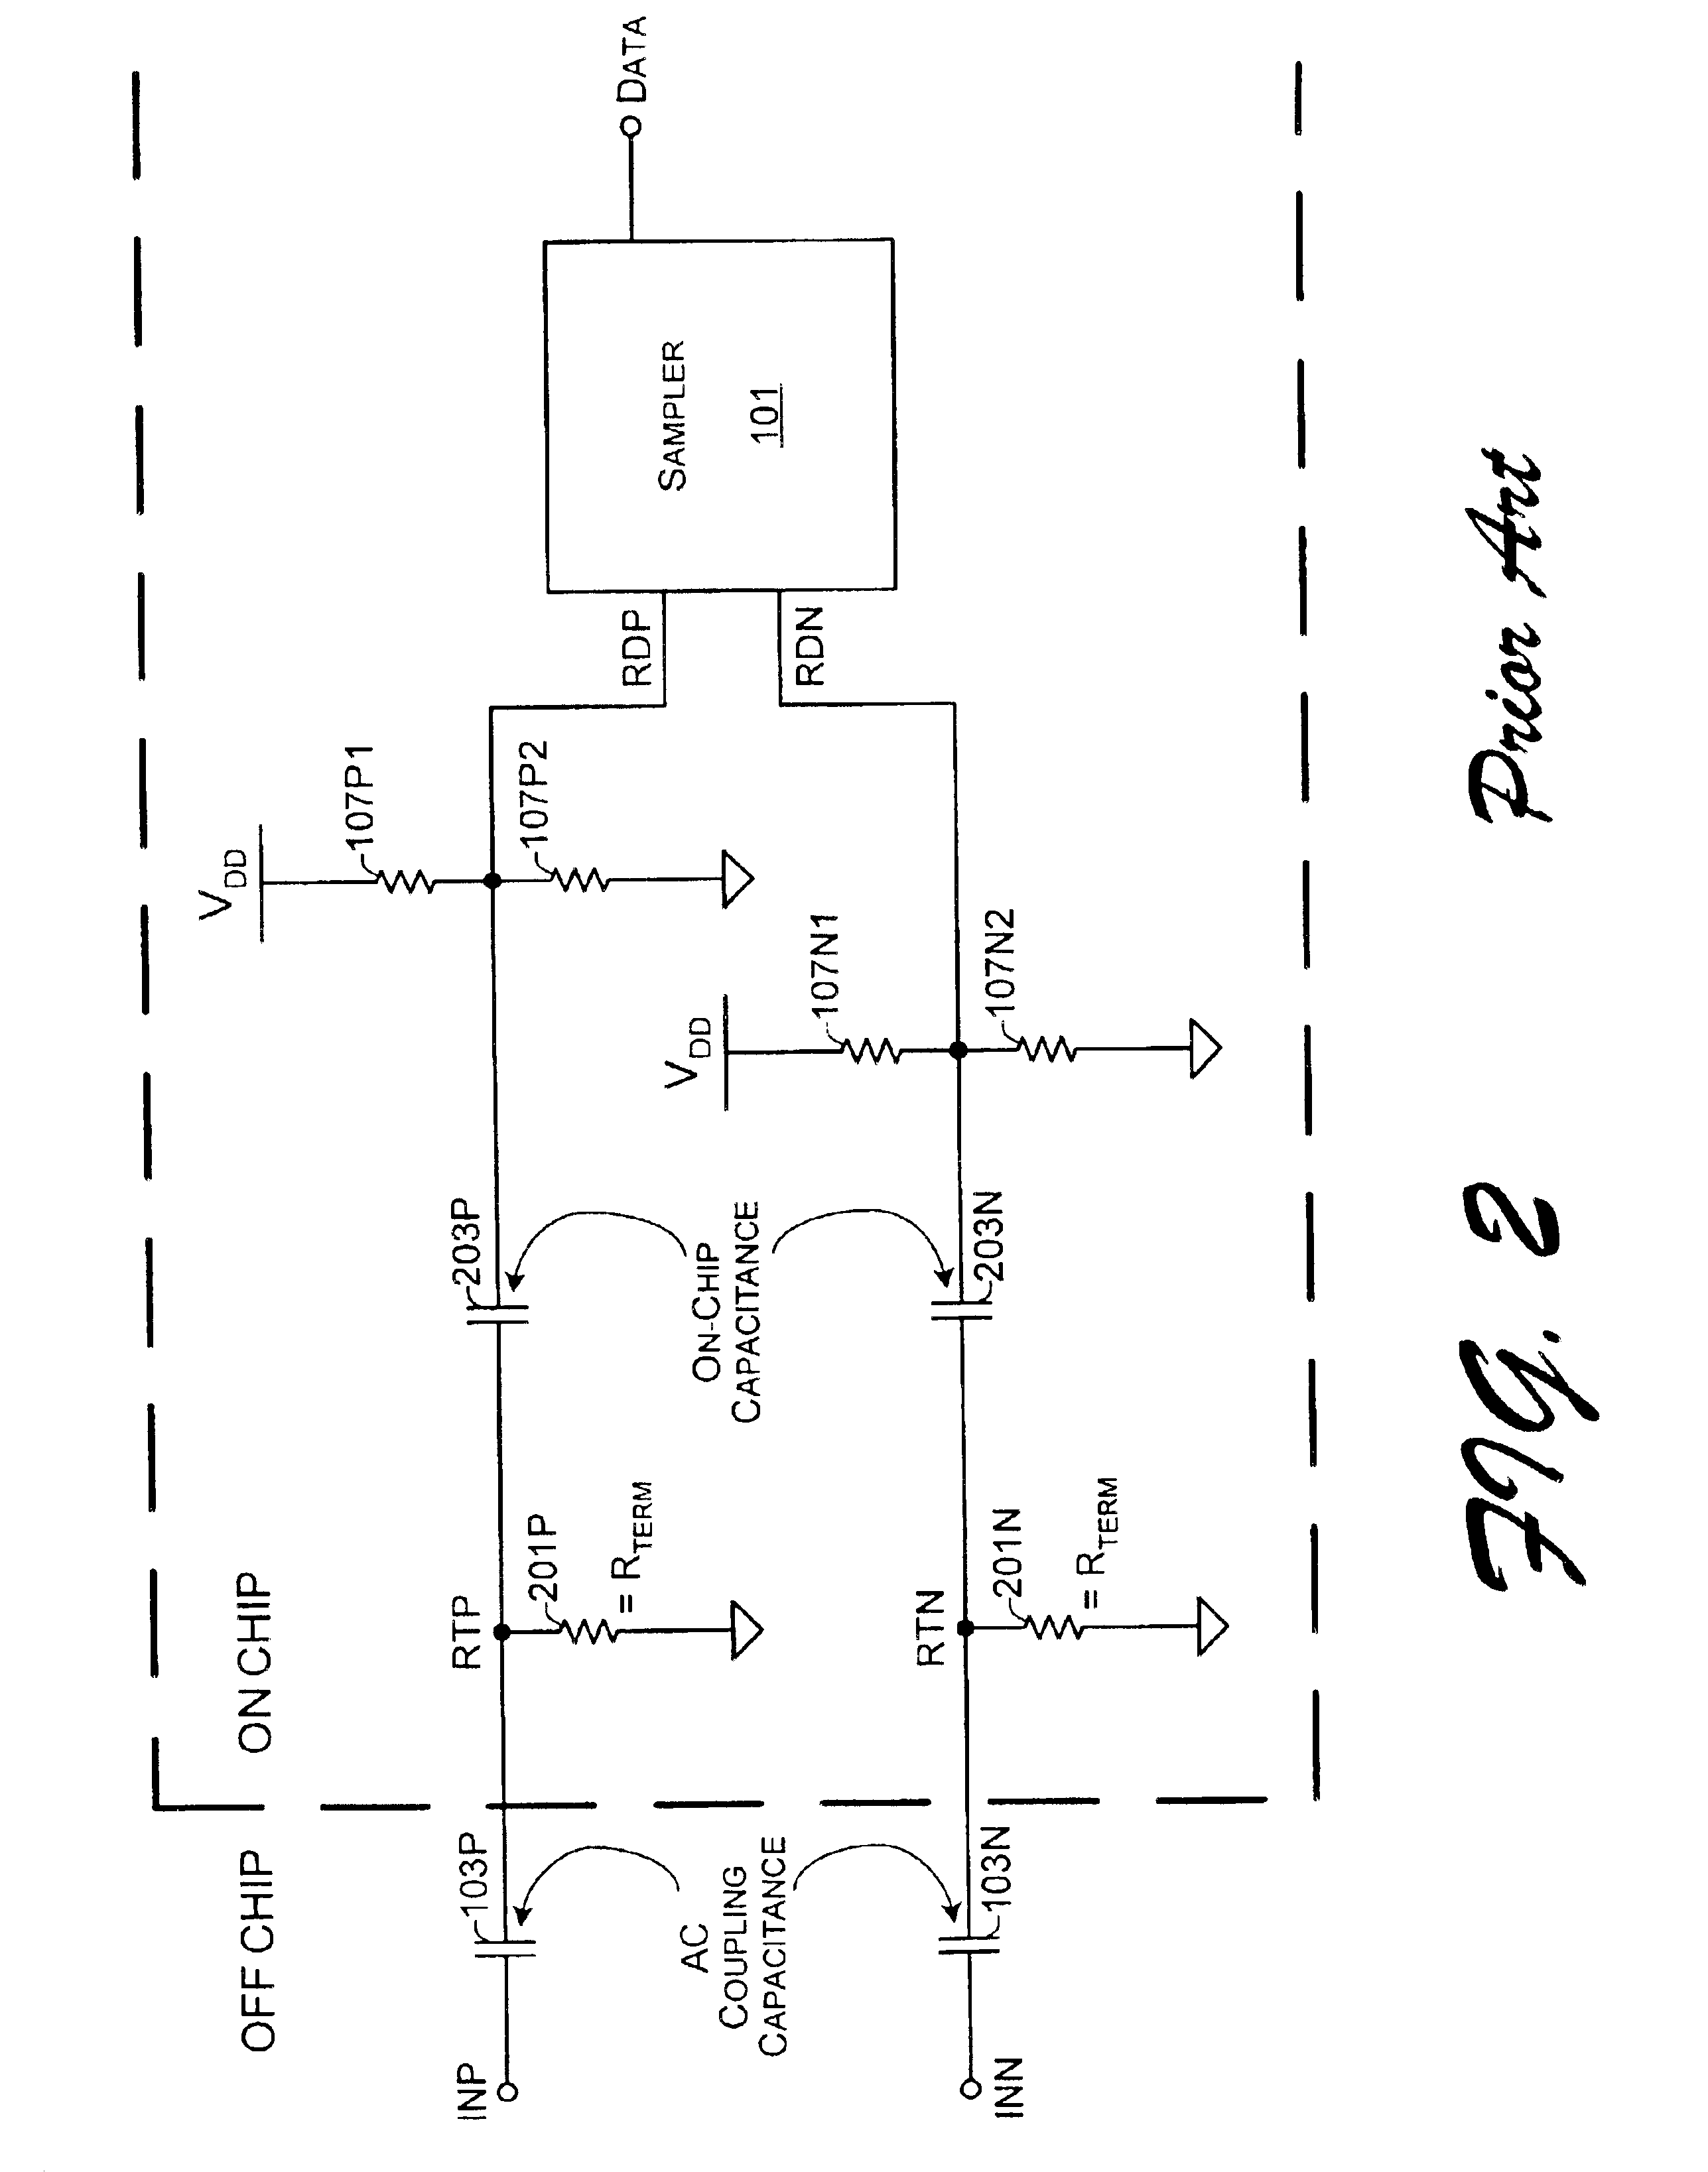 Method and apparatus for signal reception using ground termination and/or non-ground termination